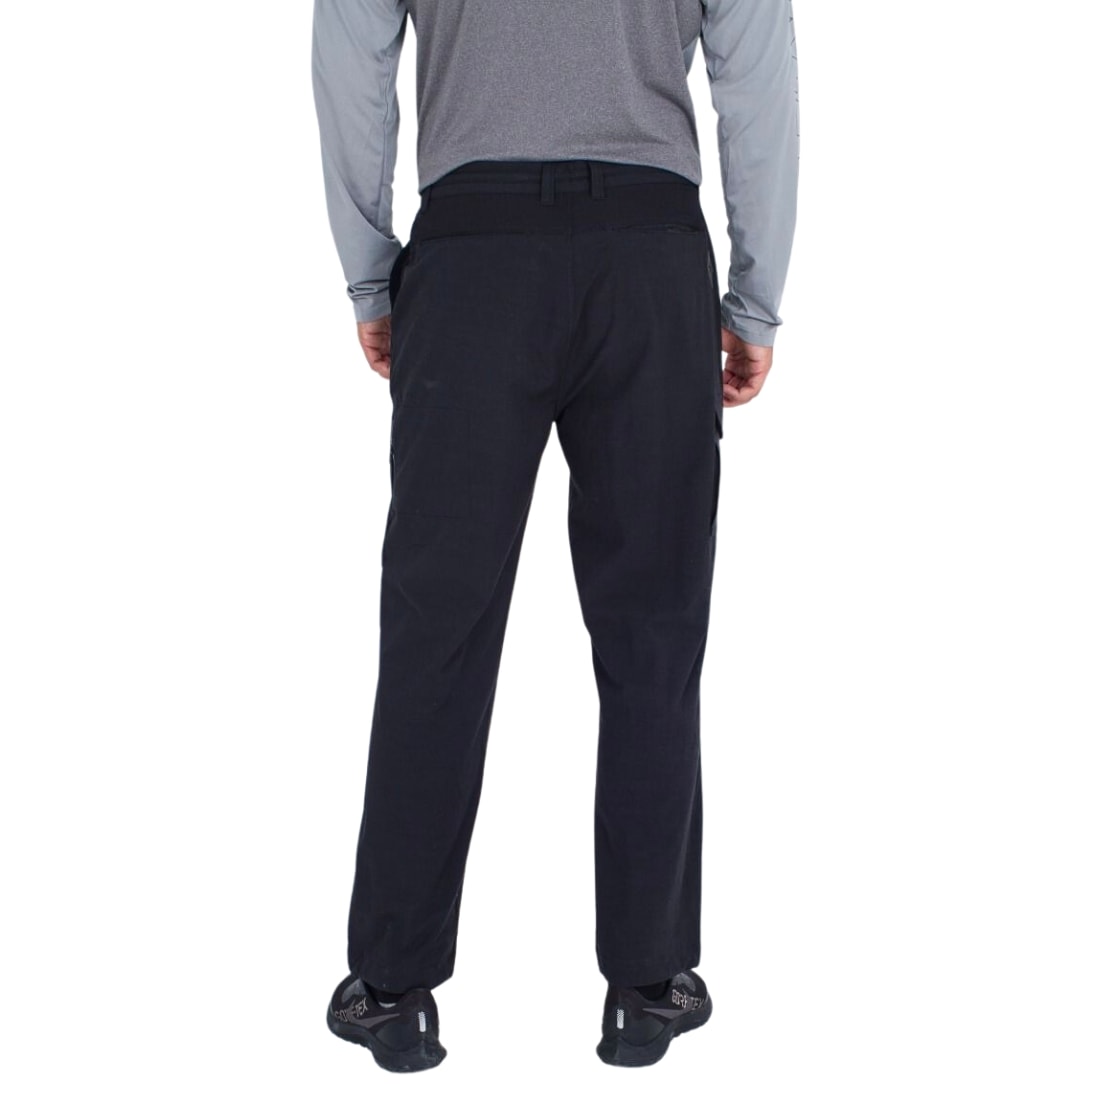 Hurley H2O-Dri Nomad Cargo Cruiser Pants - Black - Mens Cargo Pants/Trousers by Hurley